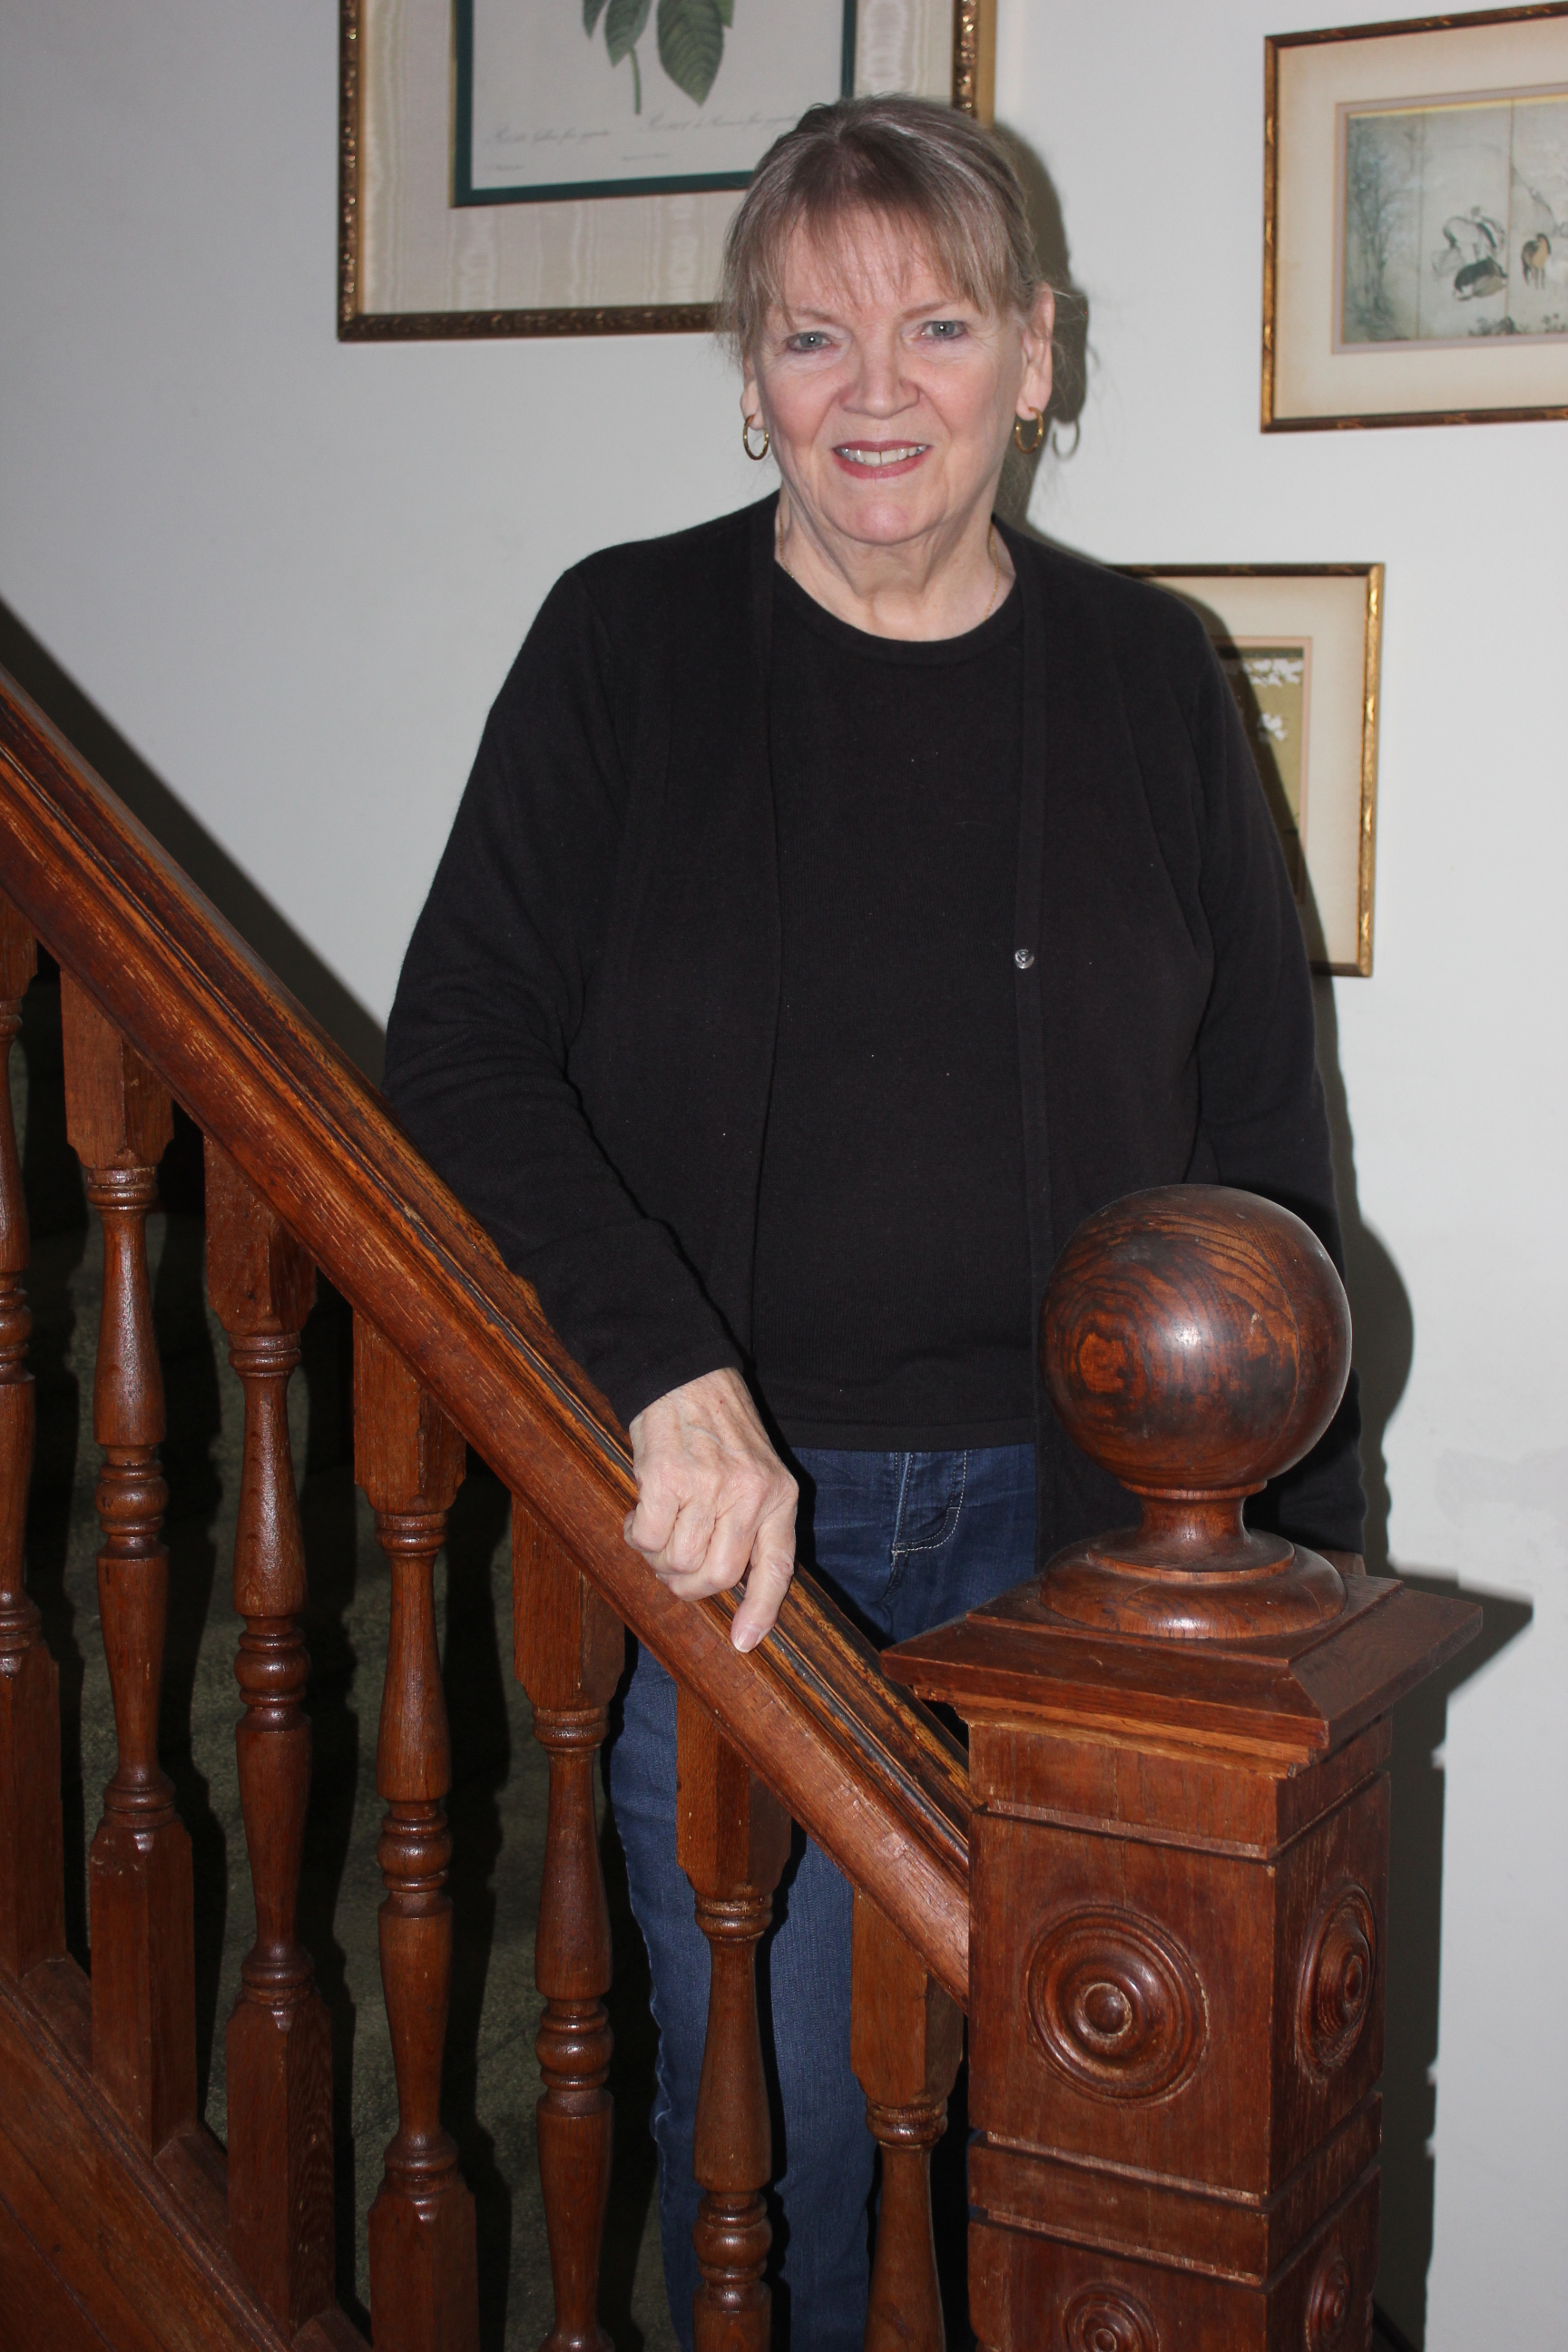 Evelyn Wagenhoffer descends the oak staircase that was painted white by a previous owner. The wood was restored and stained to bring it back to original condition.